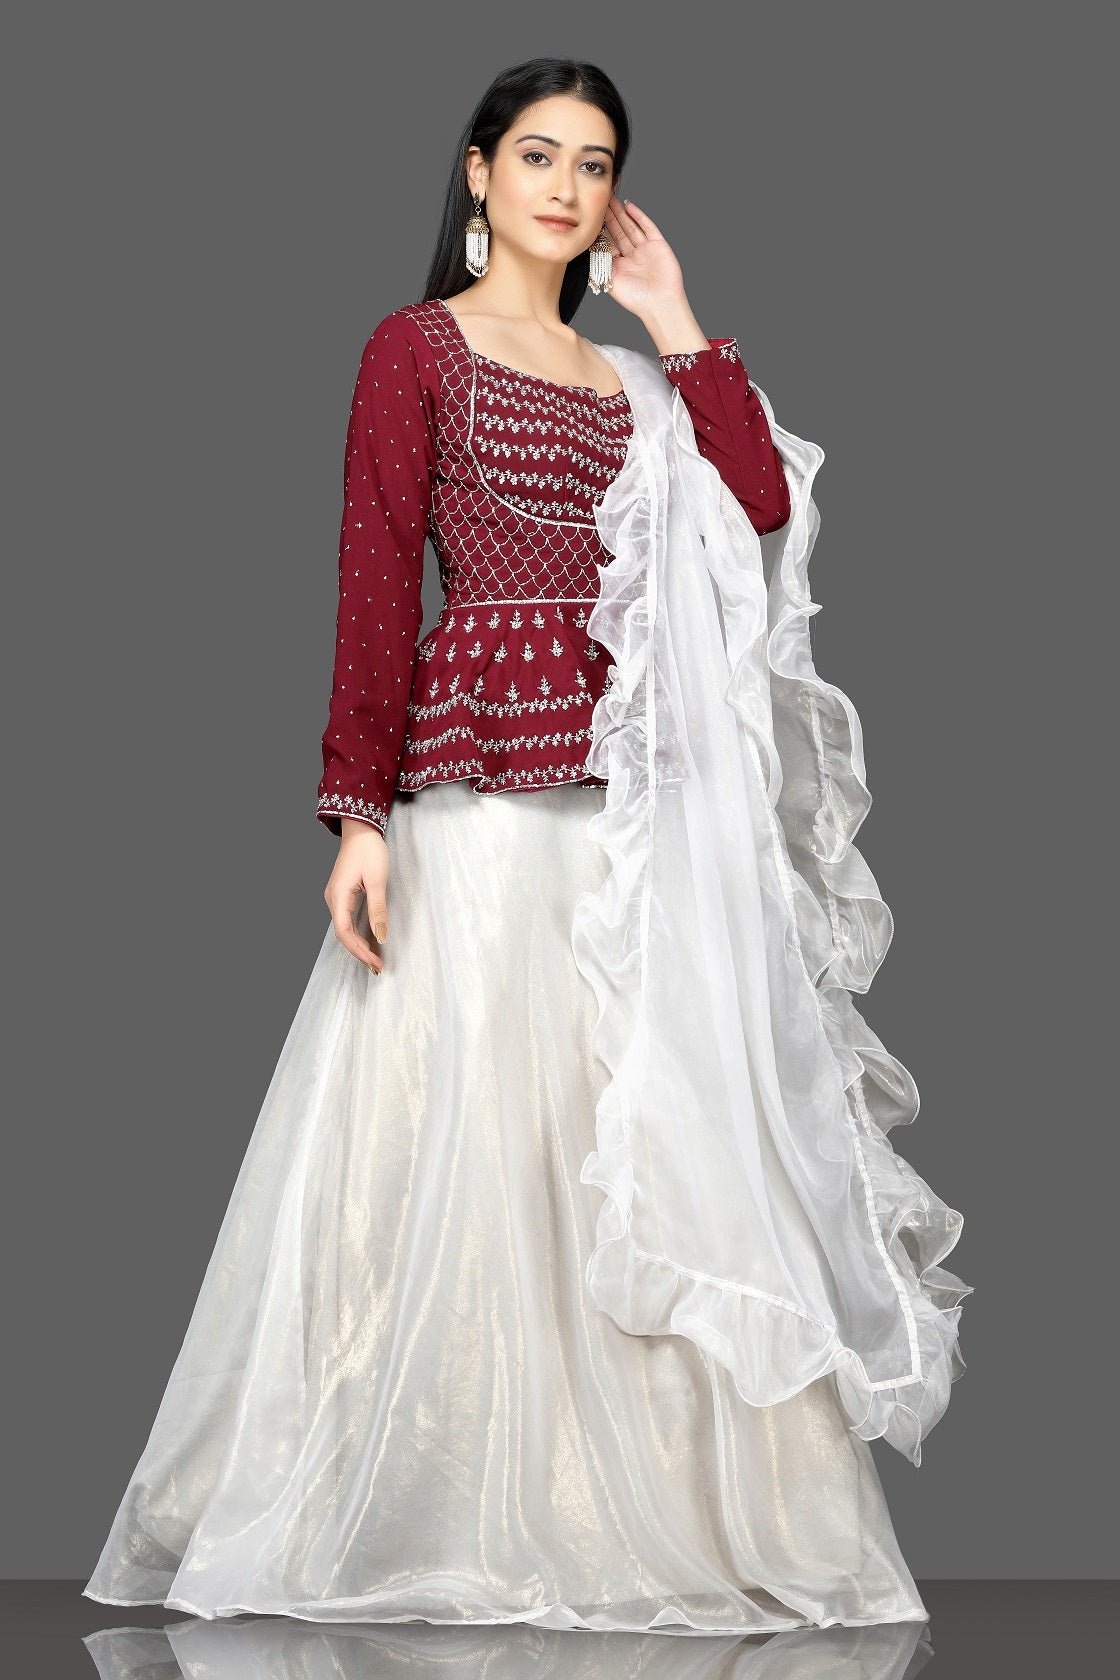 Buy stunning wine and white embroidered lehenga online in USA with white ruffle dupatta. Flaunt your sartorial choices on special occasions with beautiful designer gowns, Anarkali suits, traditional salwar suits, Indian lehengas from Pure Elegance Indian fashion boutique in USA. -right